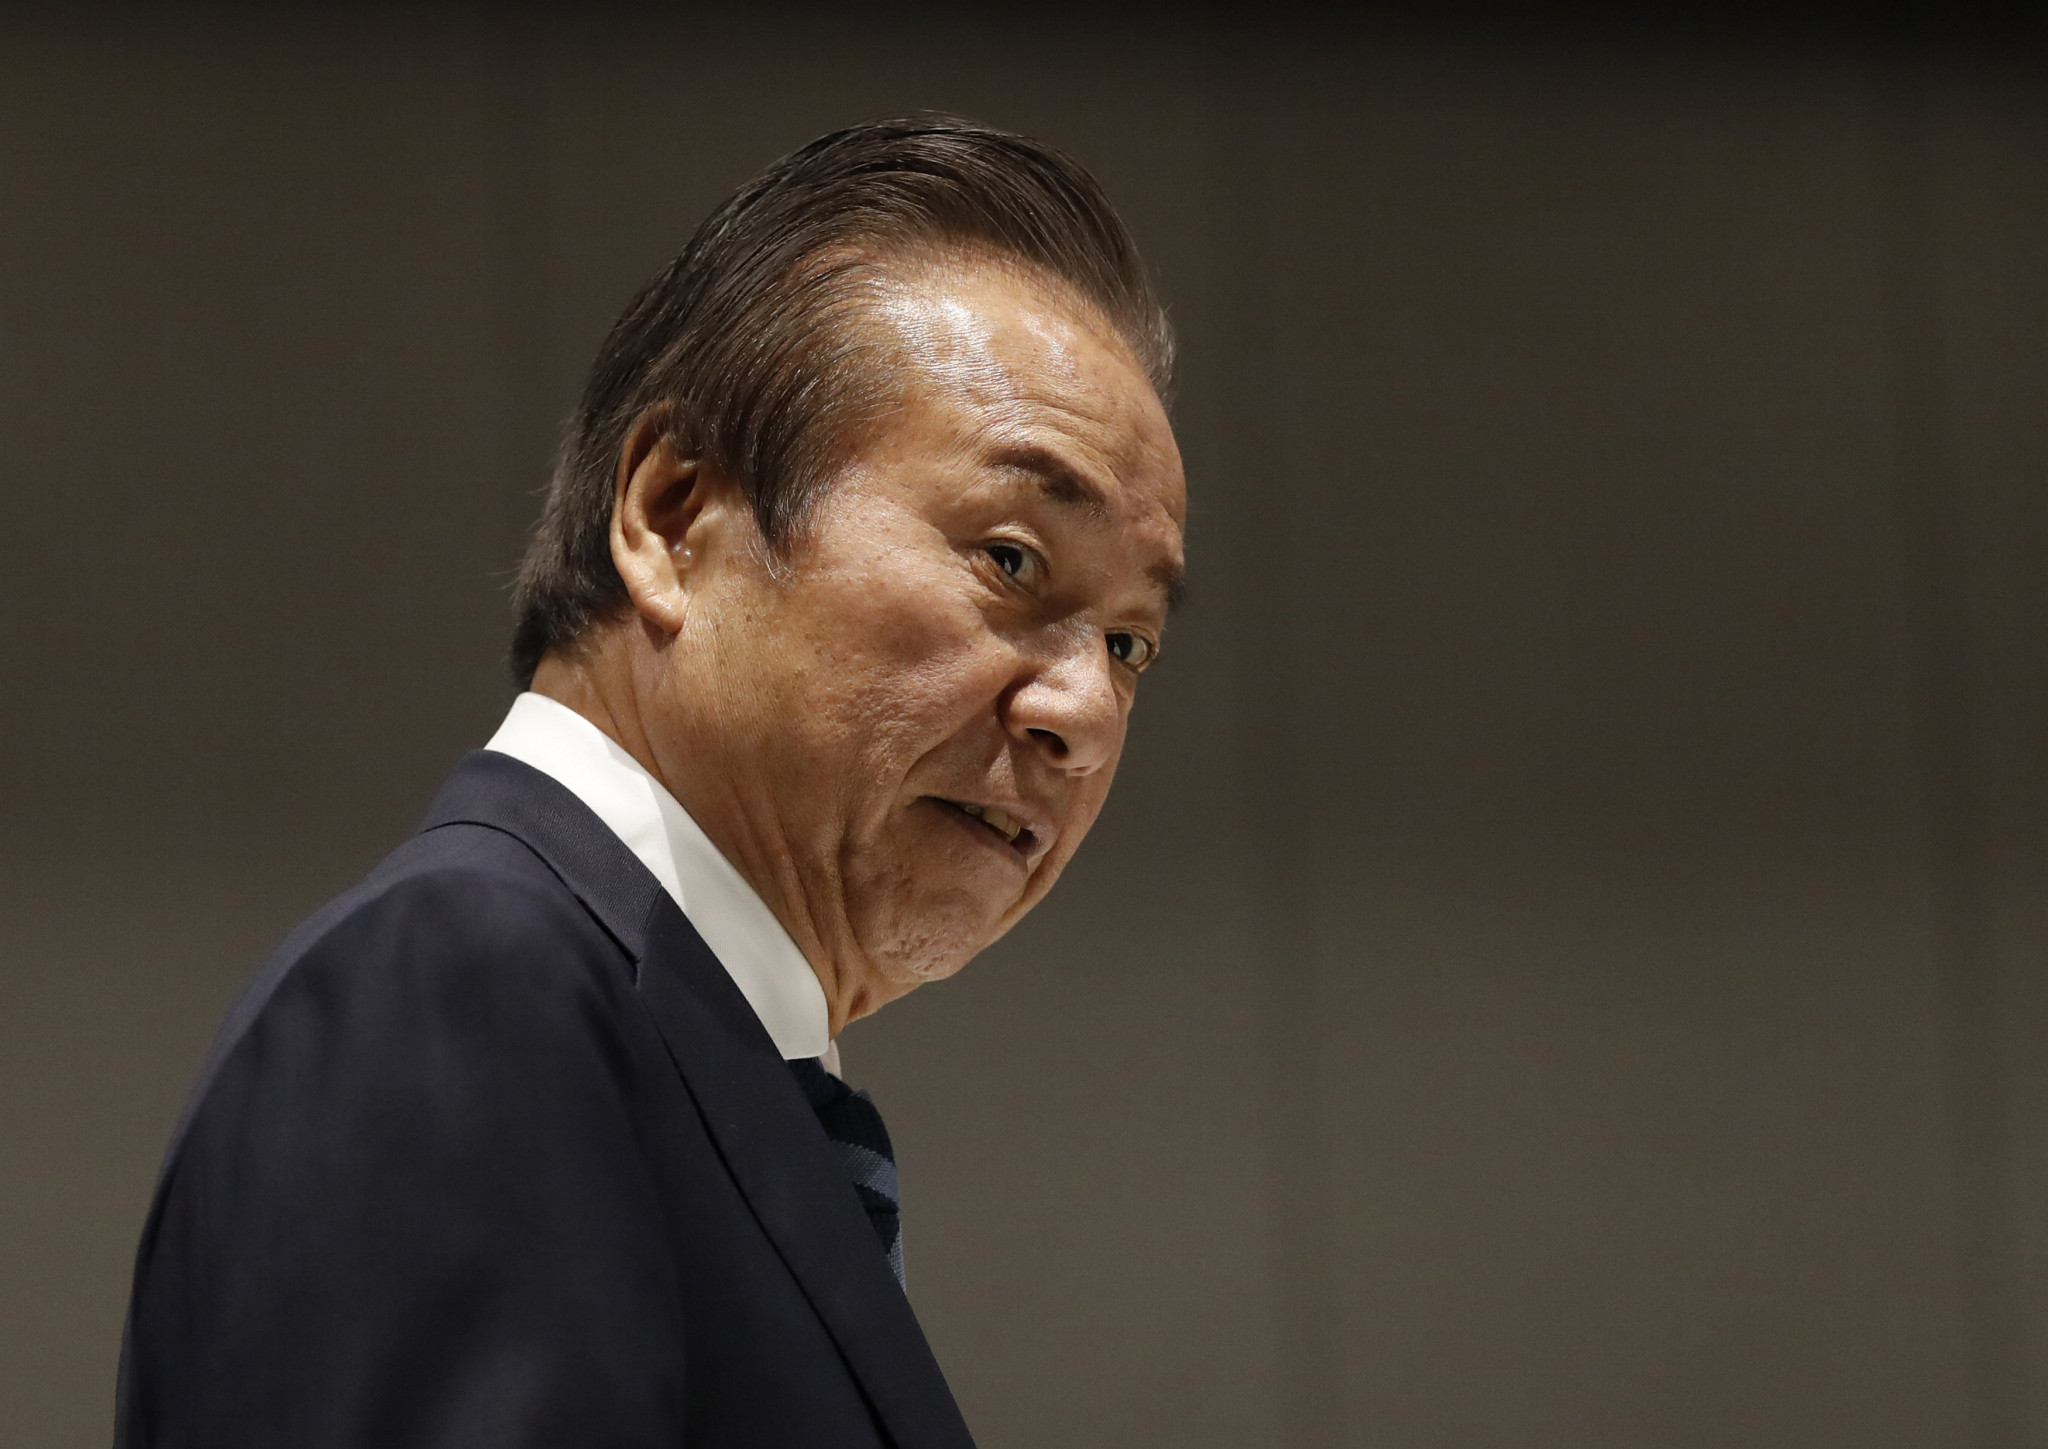 Tokyo 2020 Board member Takahashi arrested for accepting bribes